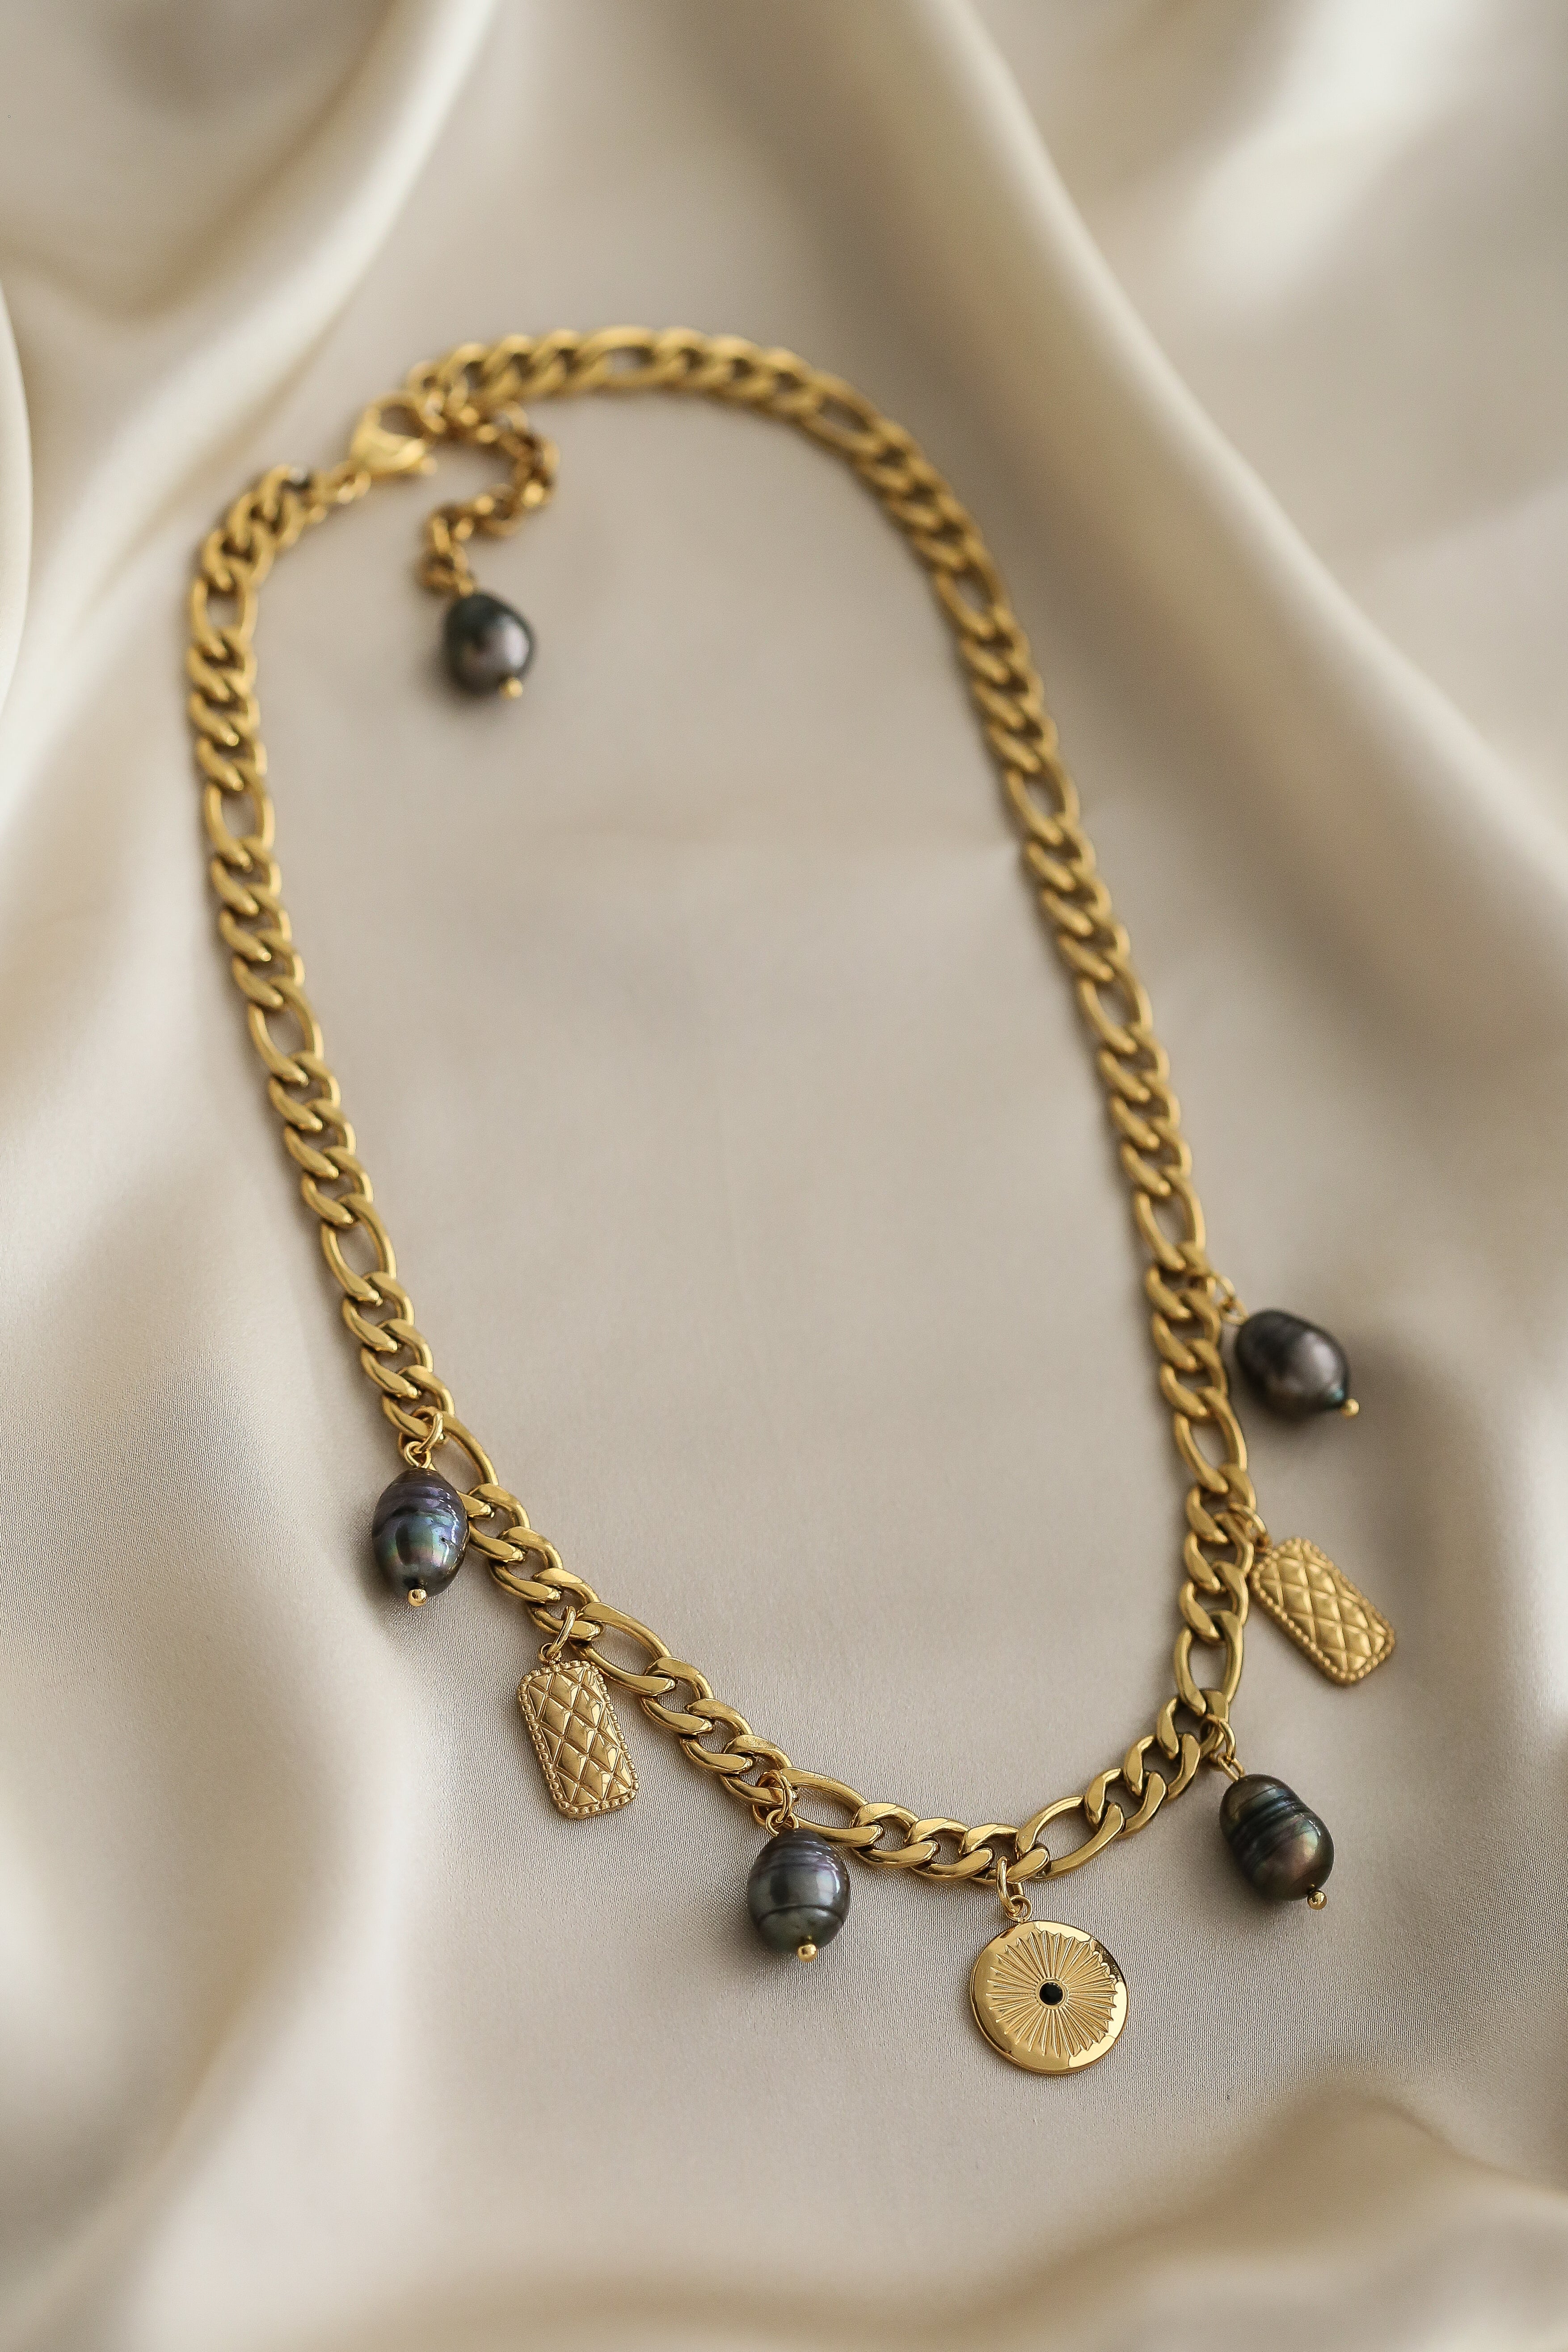 Kassandra Necklace - Boutique Minimaliste has waterproof, durable, elegant and vintage inspired jewelry